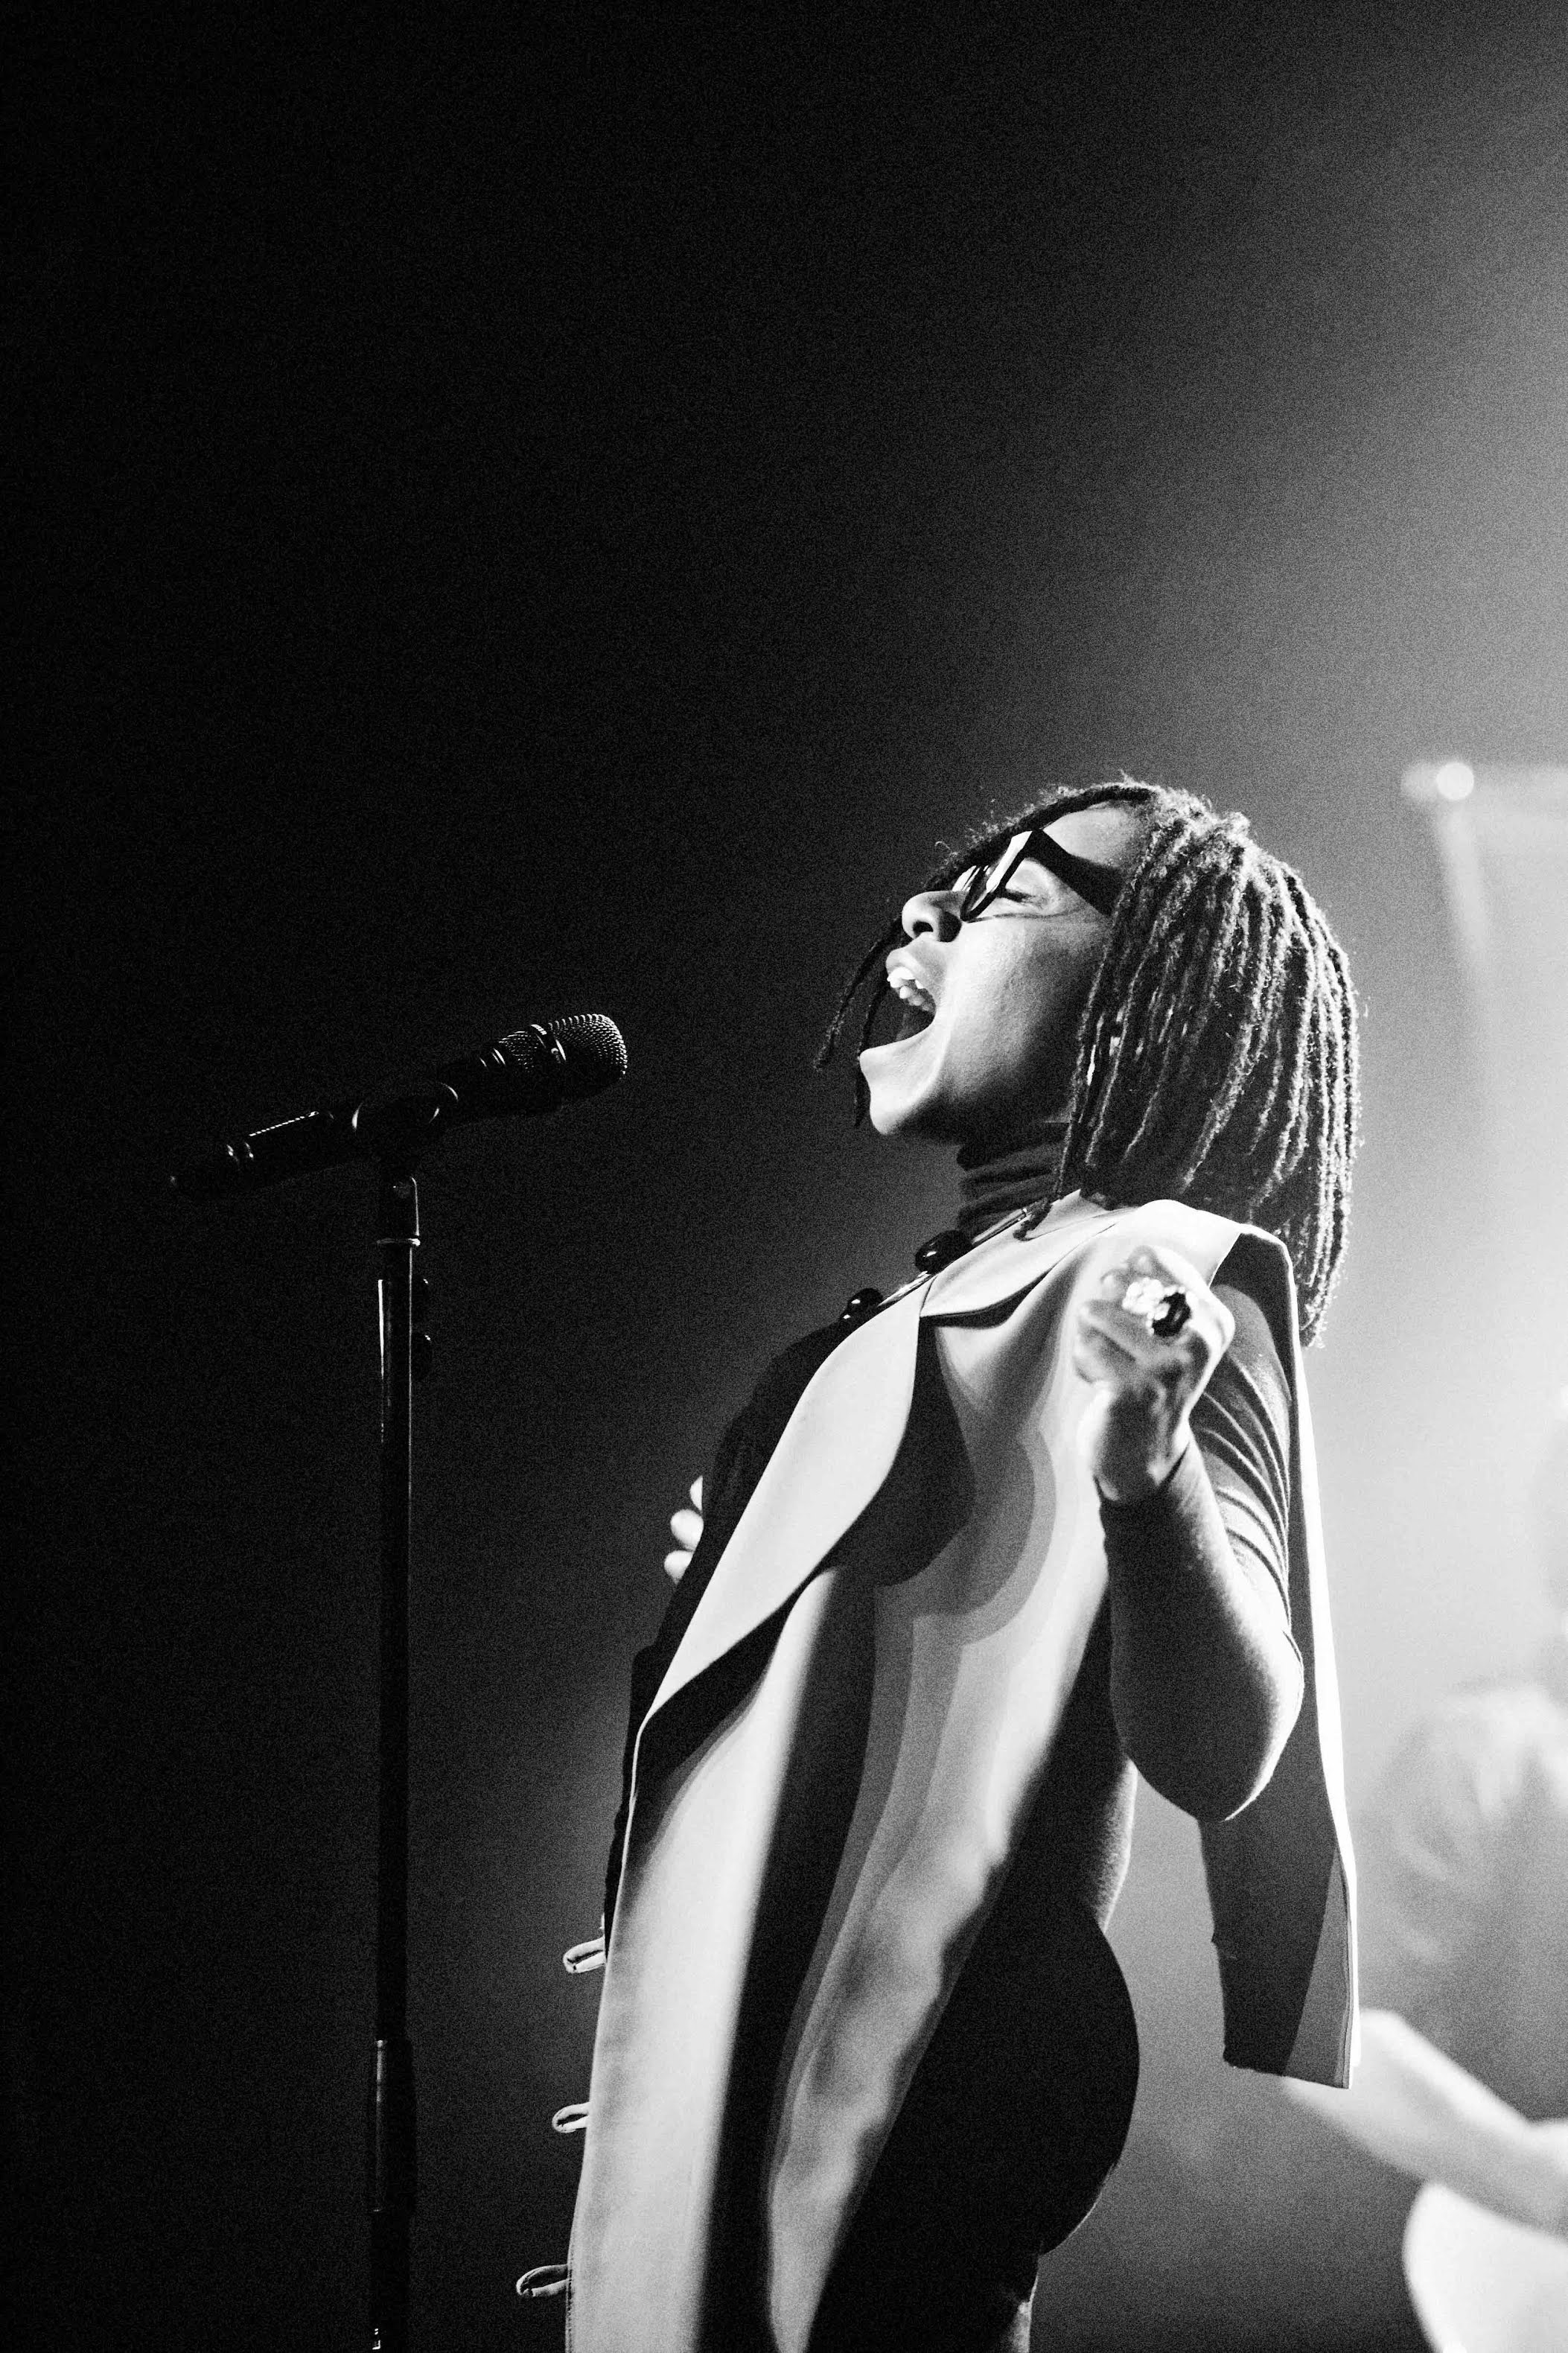 VIDEO: Asa – The One That Never Comes